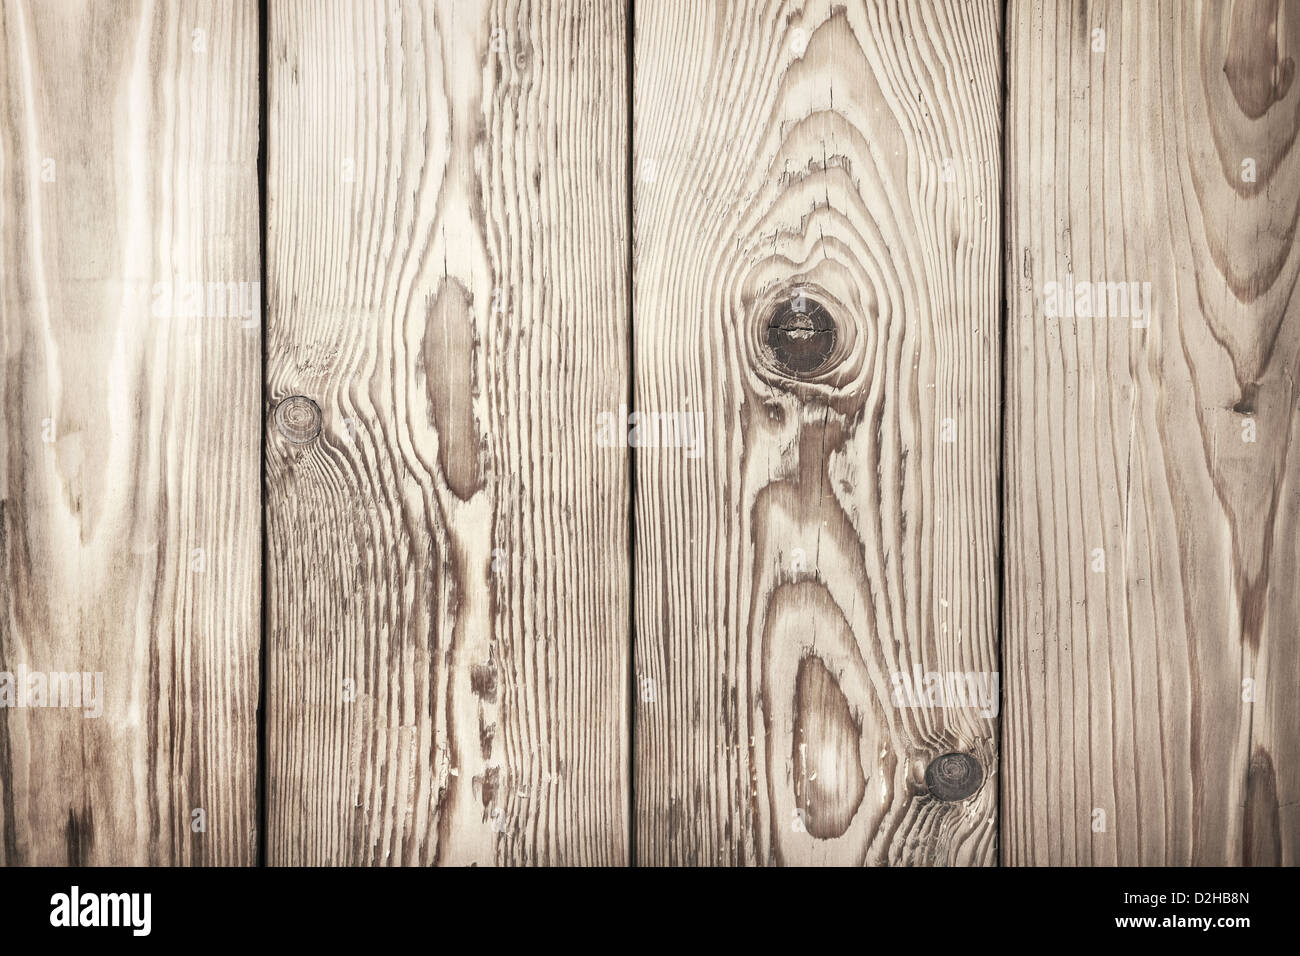 Old wood plank texture for background with natural patterns Stock Photo